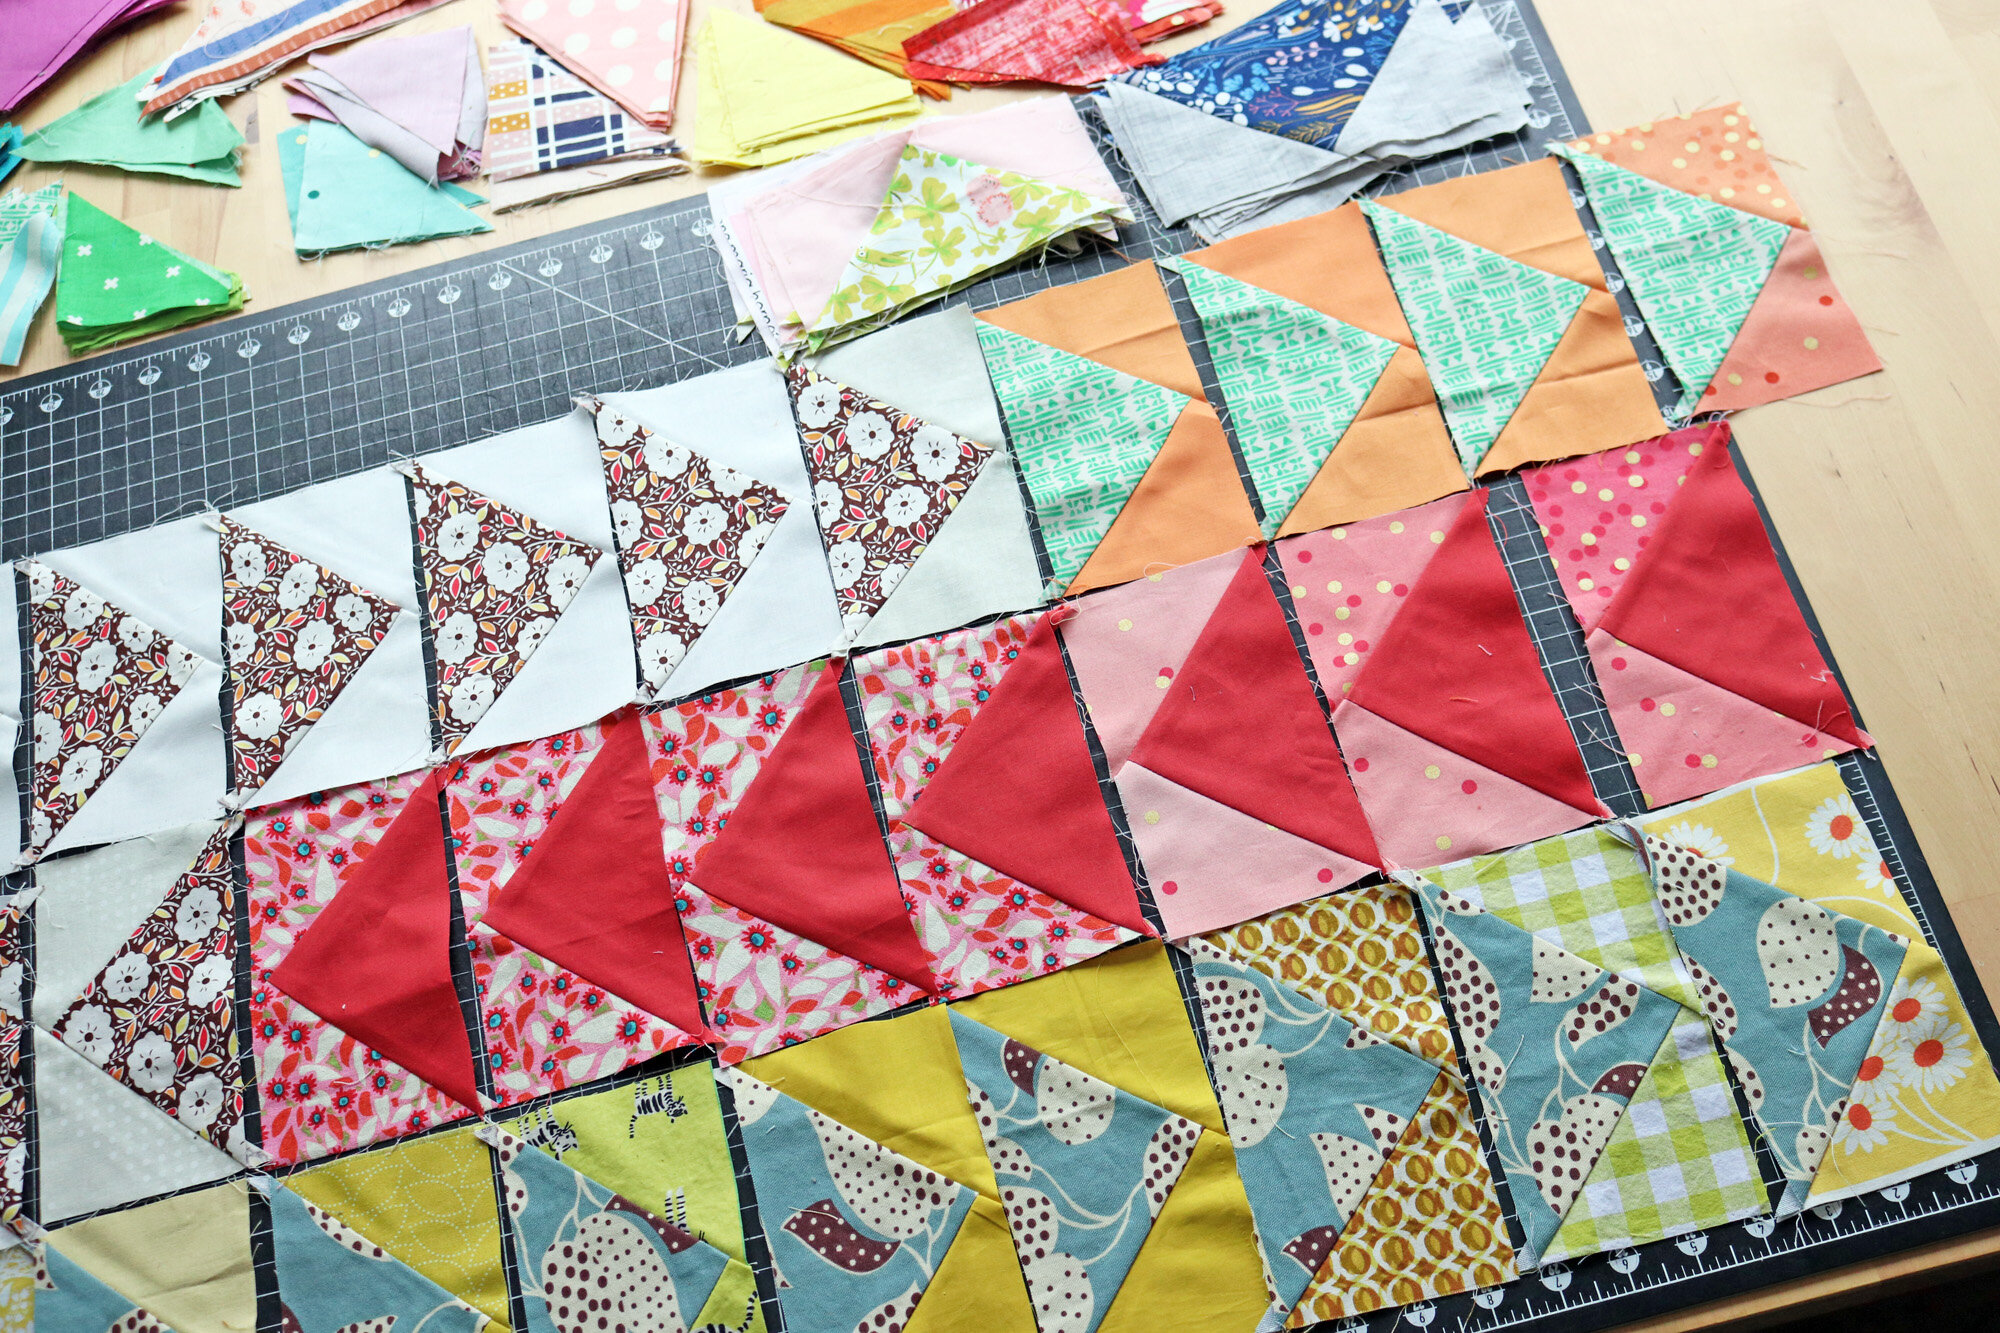 How to Sew Flying Geese Quilt Blocks - Quilt with Inklingo